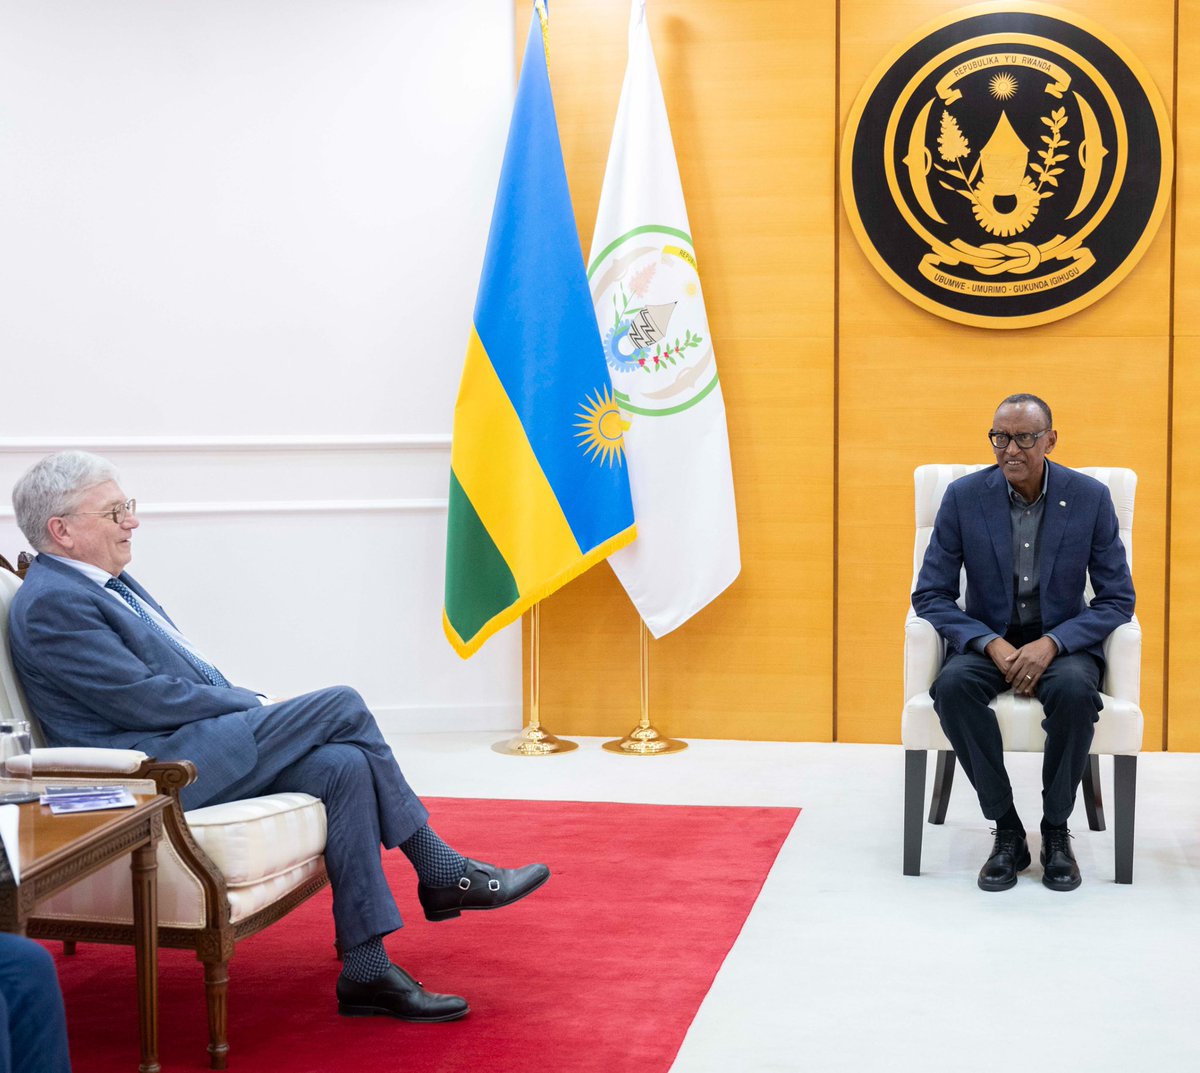 This afternoon at Urugwiro Village, President Kagame received Prof. Romain Murenzi, Professor at Worcester Polytechnic Institute and Prof. Remi Quirion, Chief Scientist of Quebec for discussions on expanding science advice for governments as the International Network for